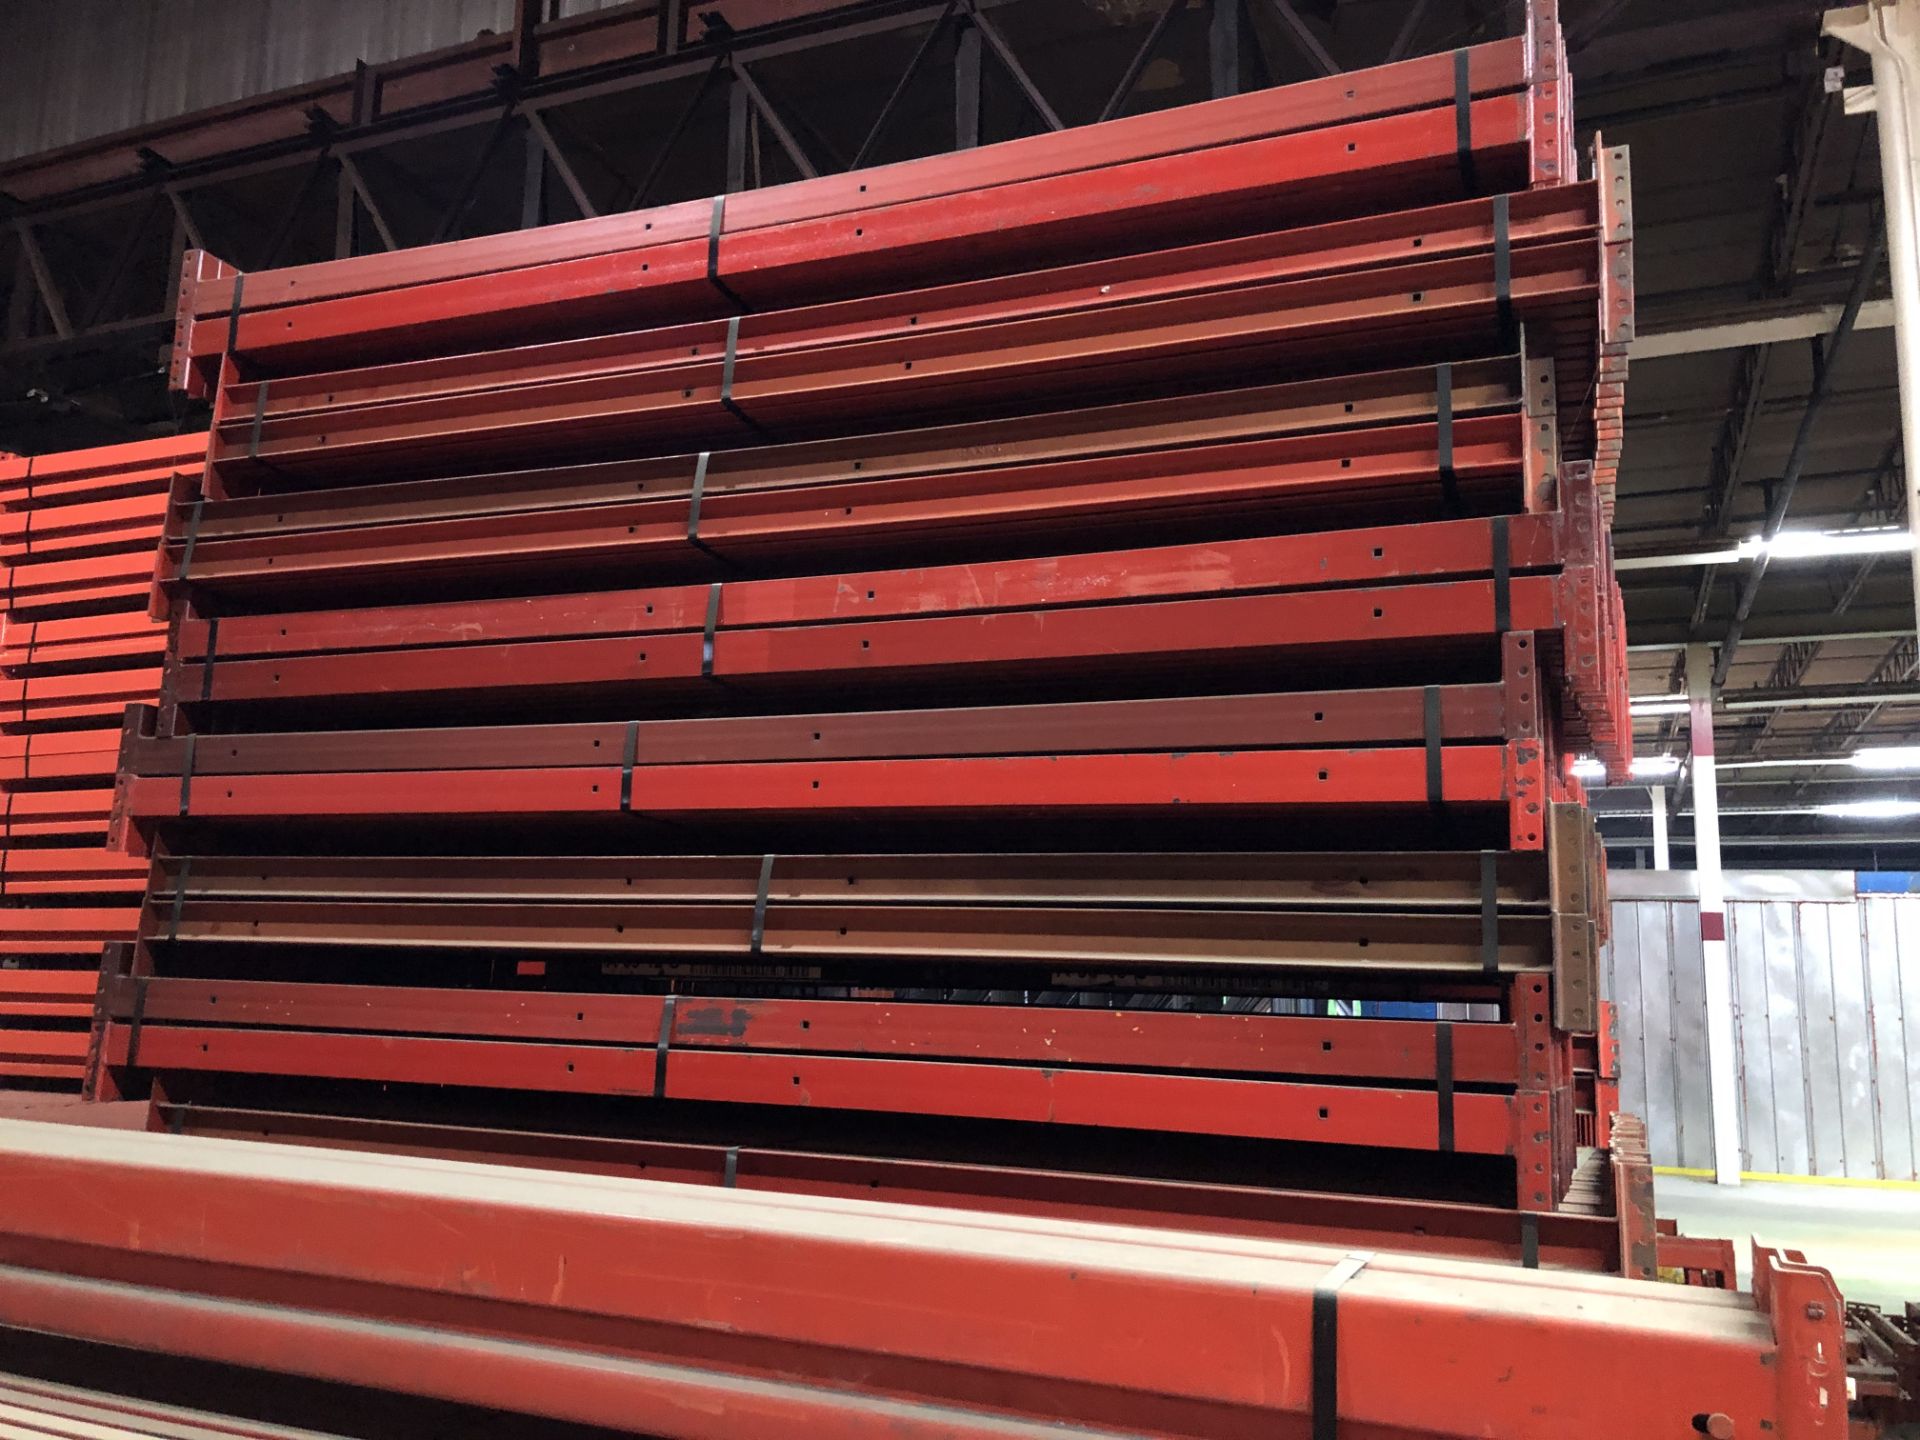 14 BAYS OF 10.5'H X 42"D X 102"L STRUCTURAL STYLE PALLET RACKS - Image 4 of 4